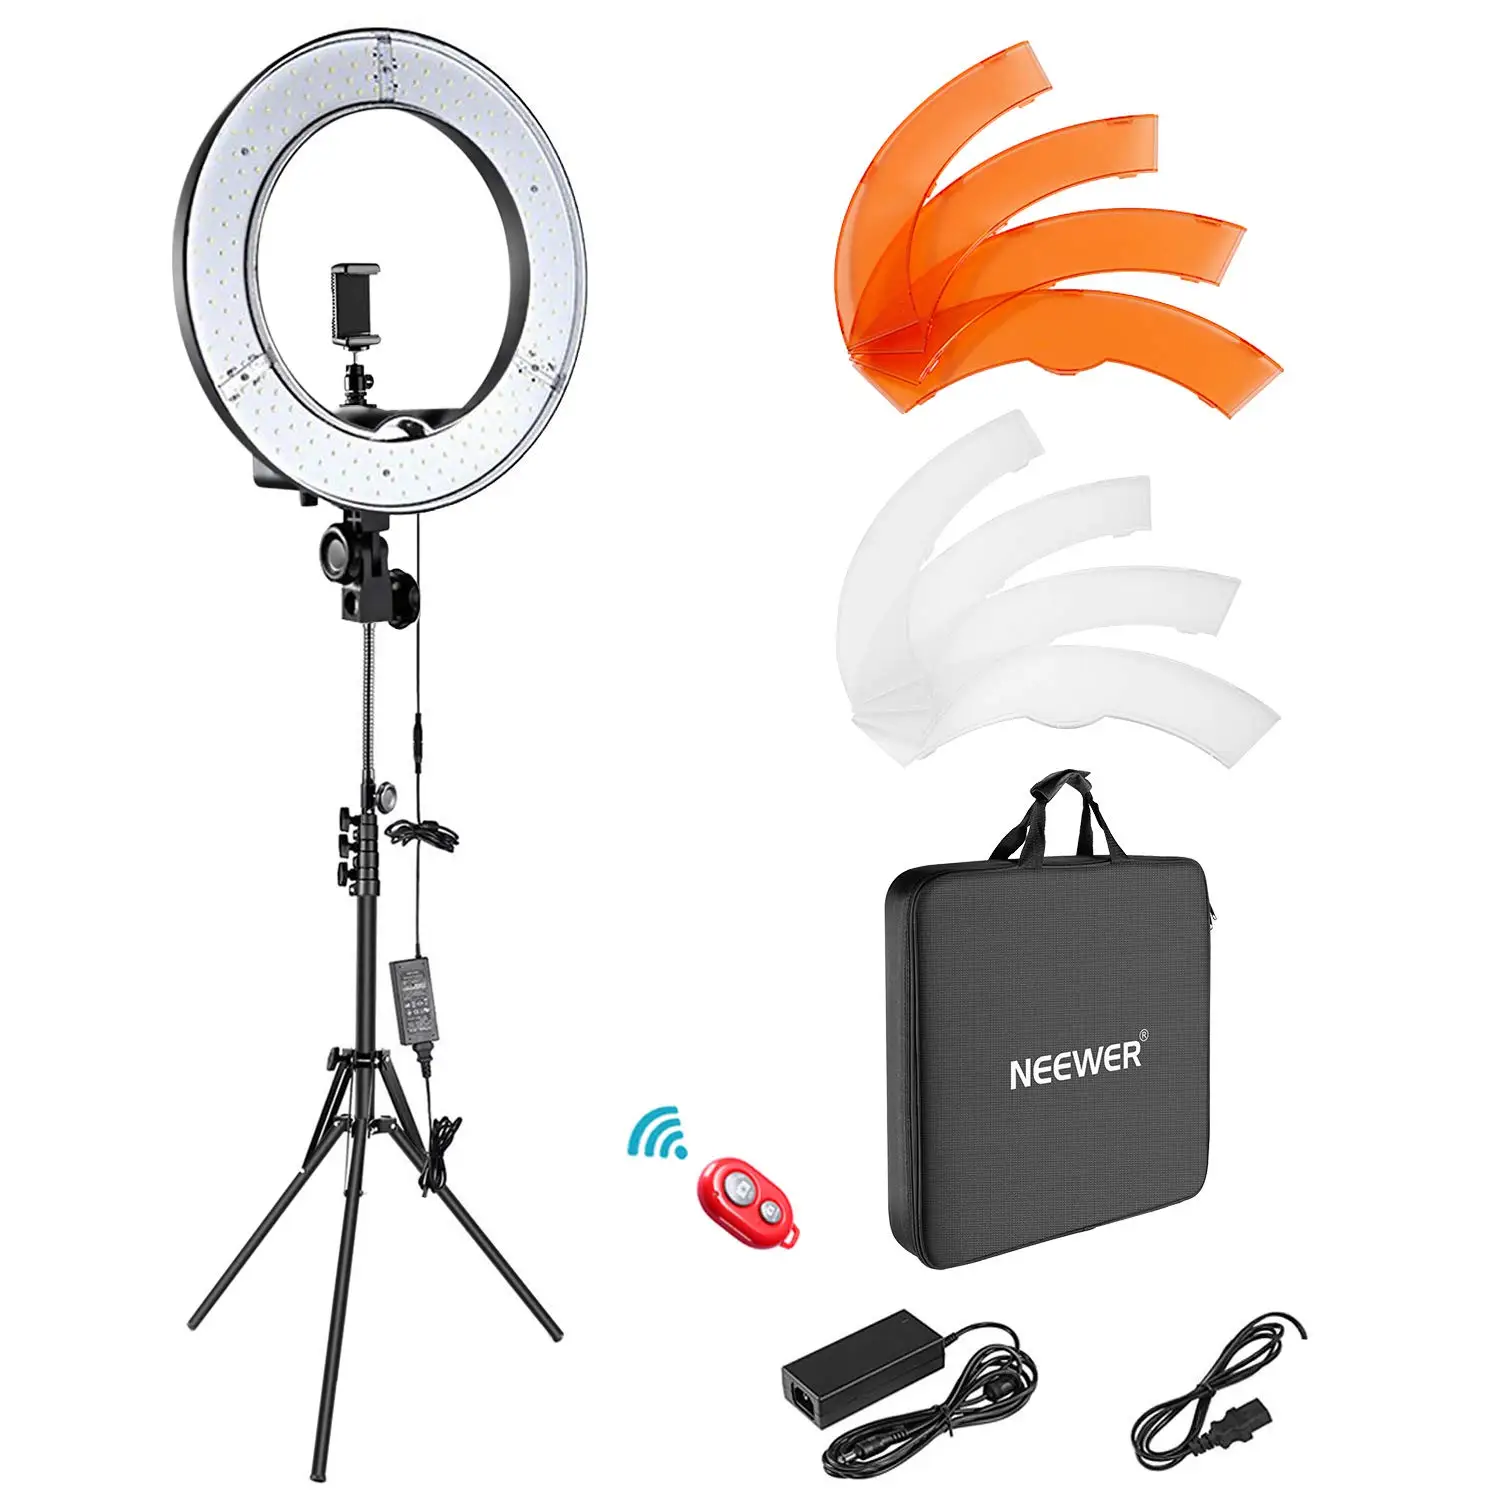 

Ring Light 18 Inch 48cm 55W 5500K Dimmable LED Ring Light, Light Stand, Carrying Bag for Live Stream Makeup YouTube